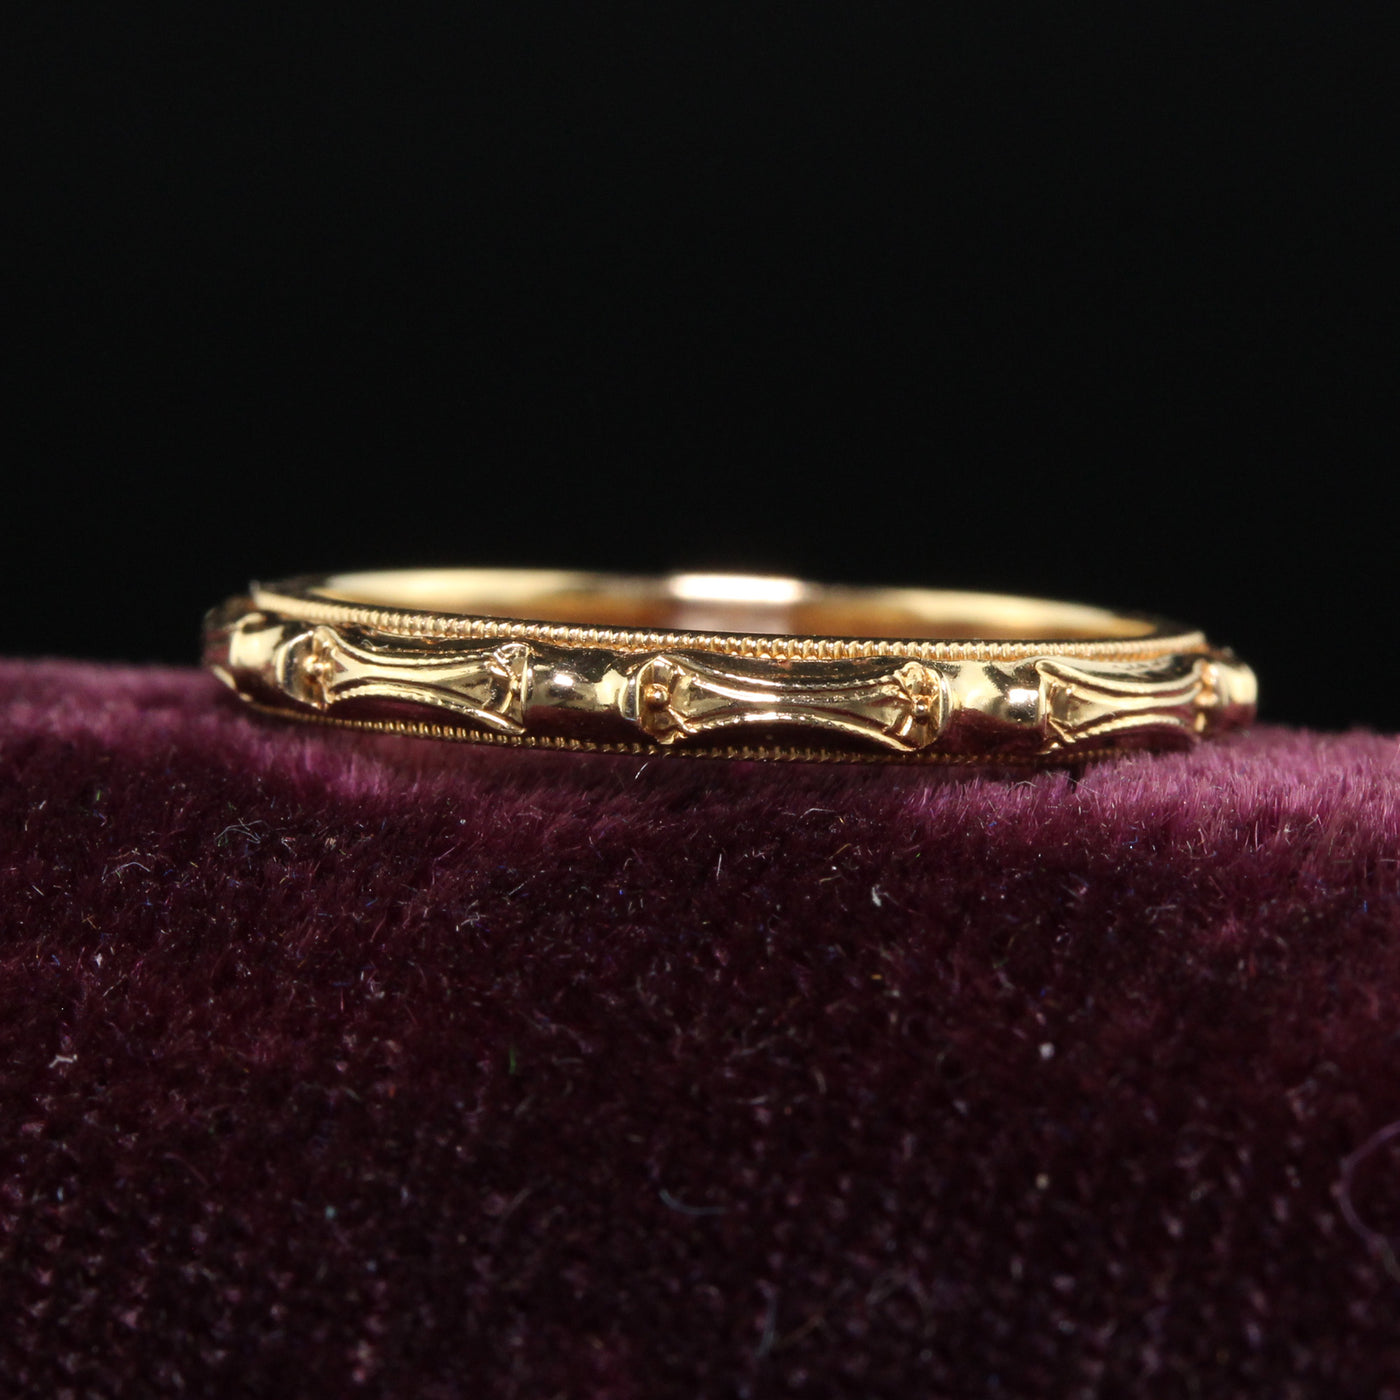 Antique Art Deco Art Carved 14K Yellow Gold Engraved Wedding Band - Size 5